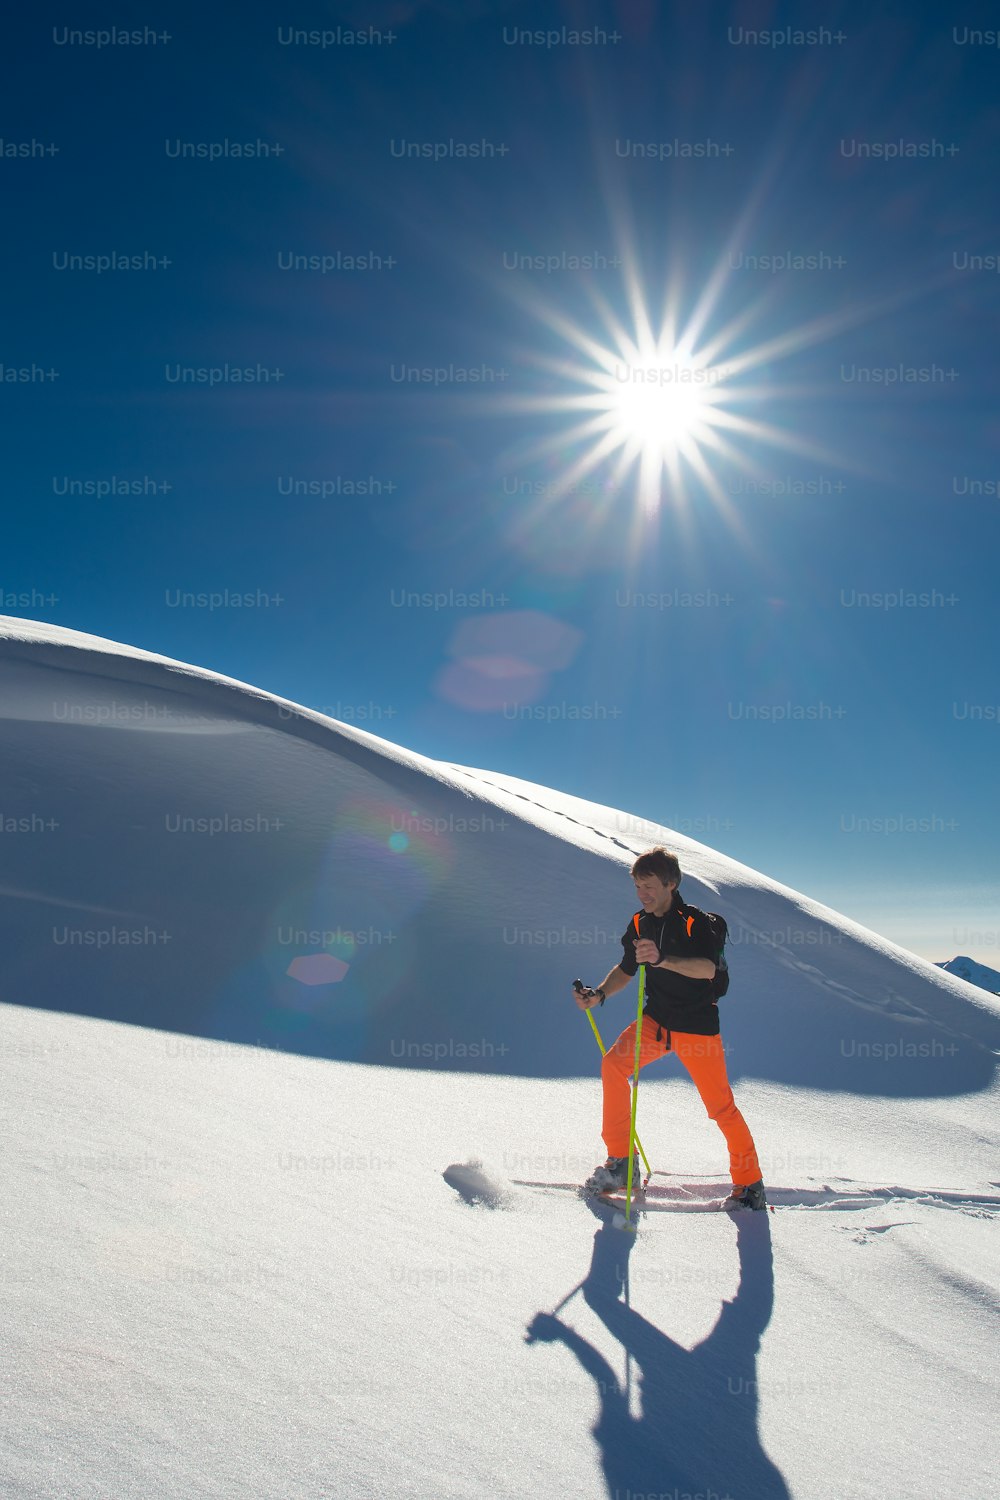 A man alpine skier climb on skis and sealskins in fresh snow in a strong sunny day